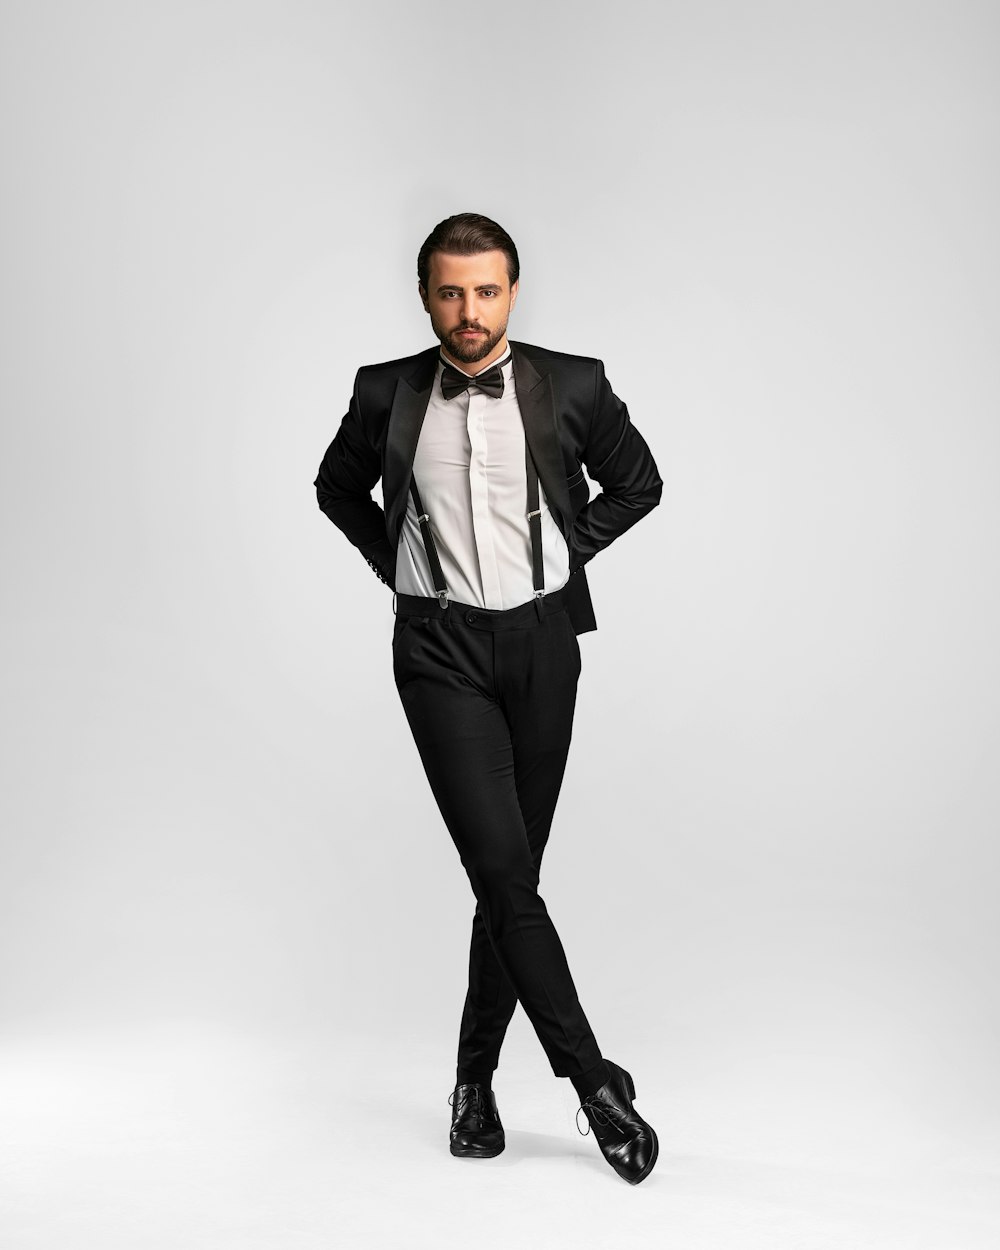 a man in a tuxedo posing for a picture